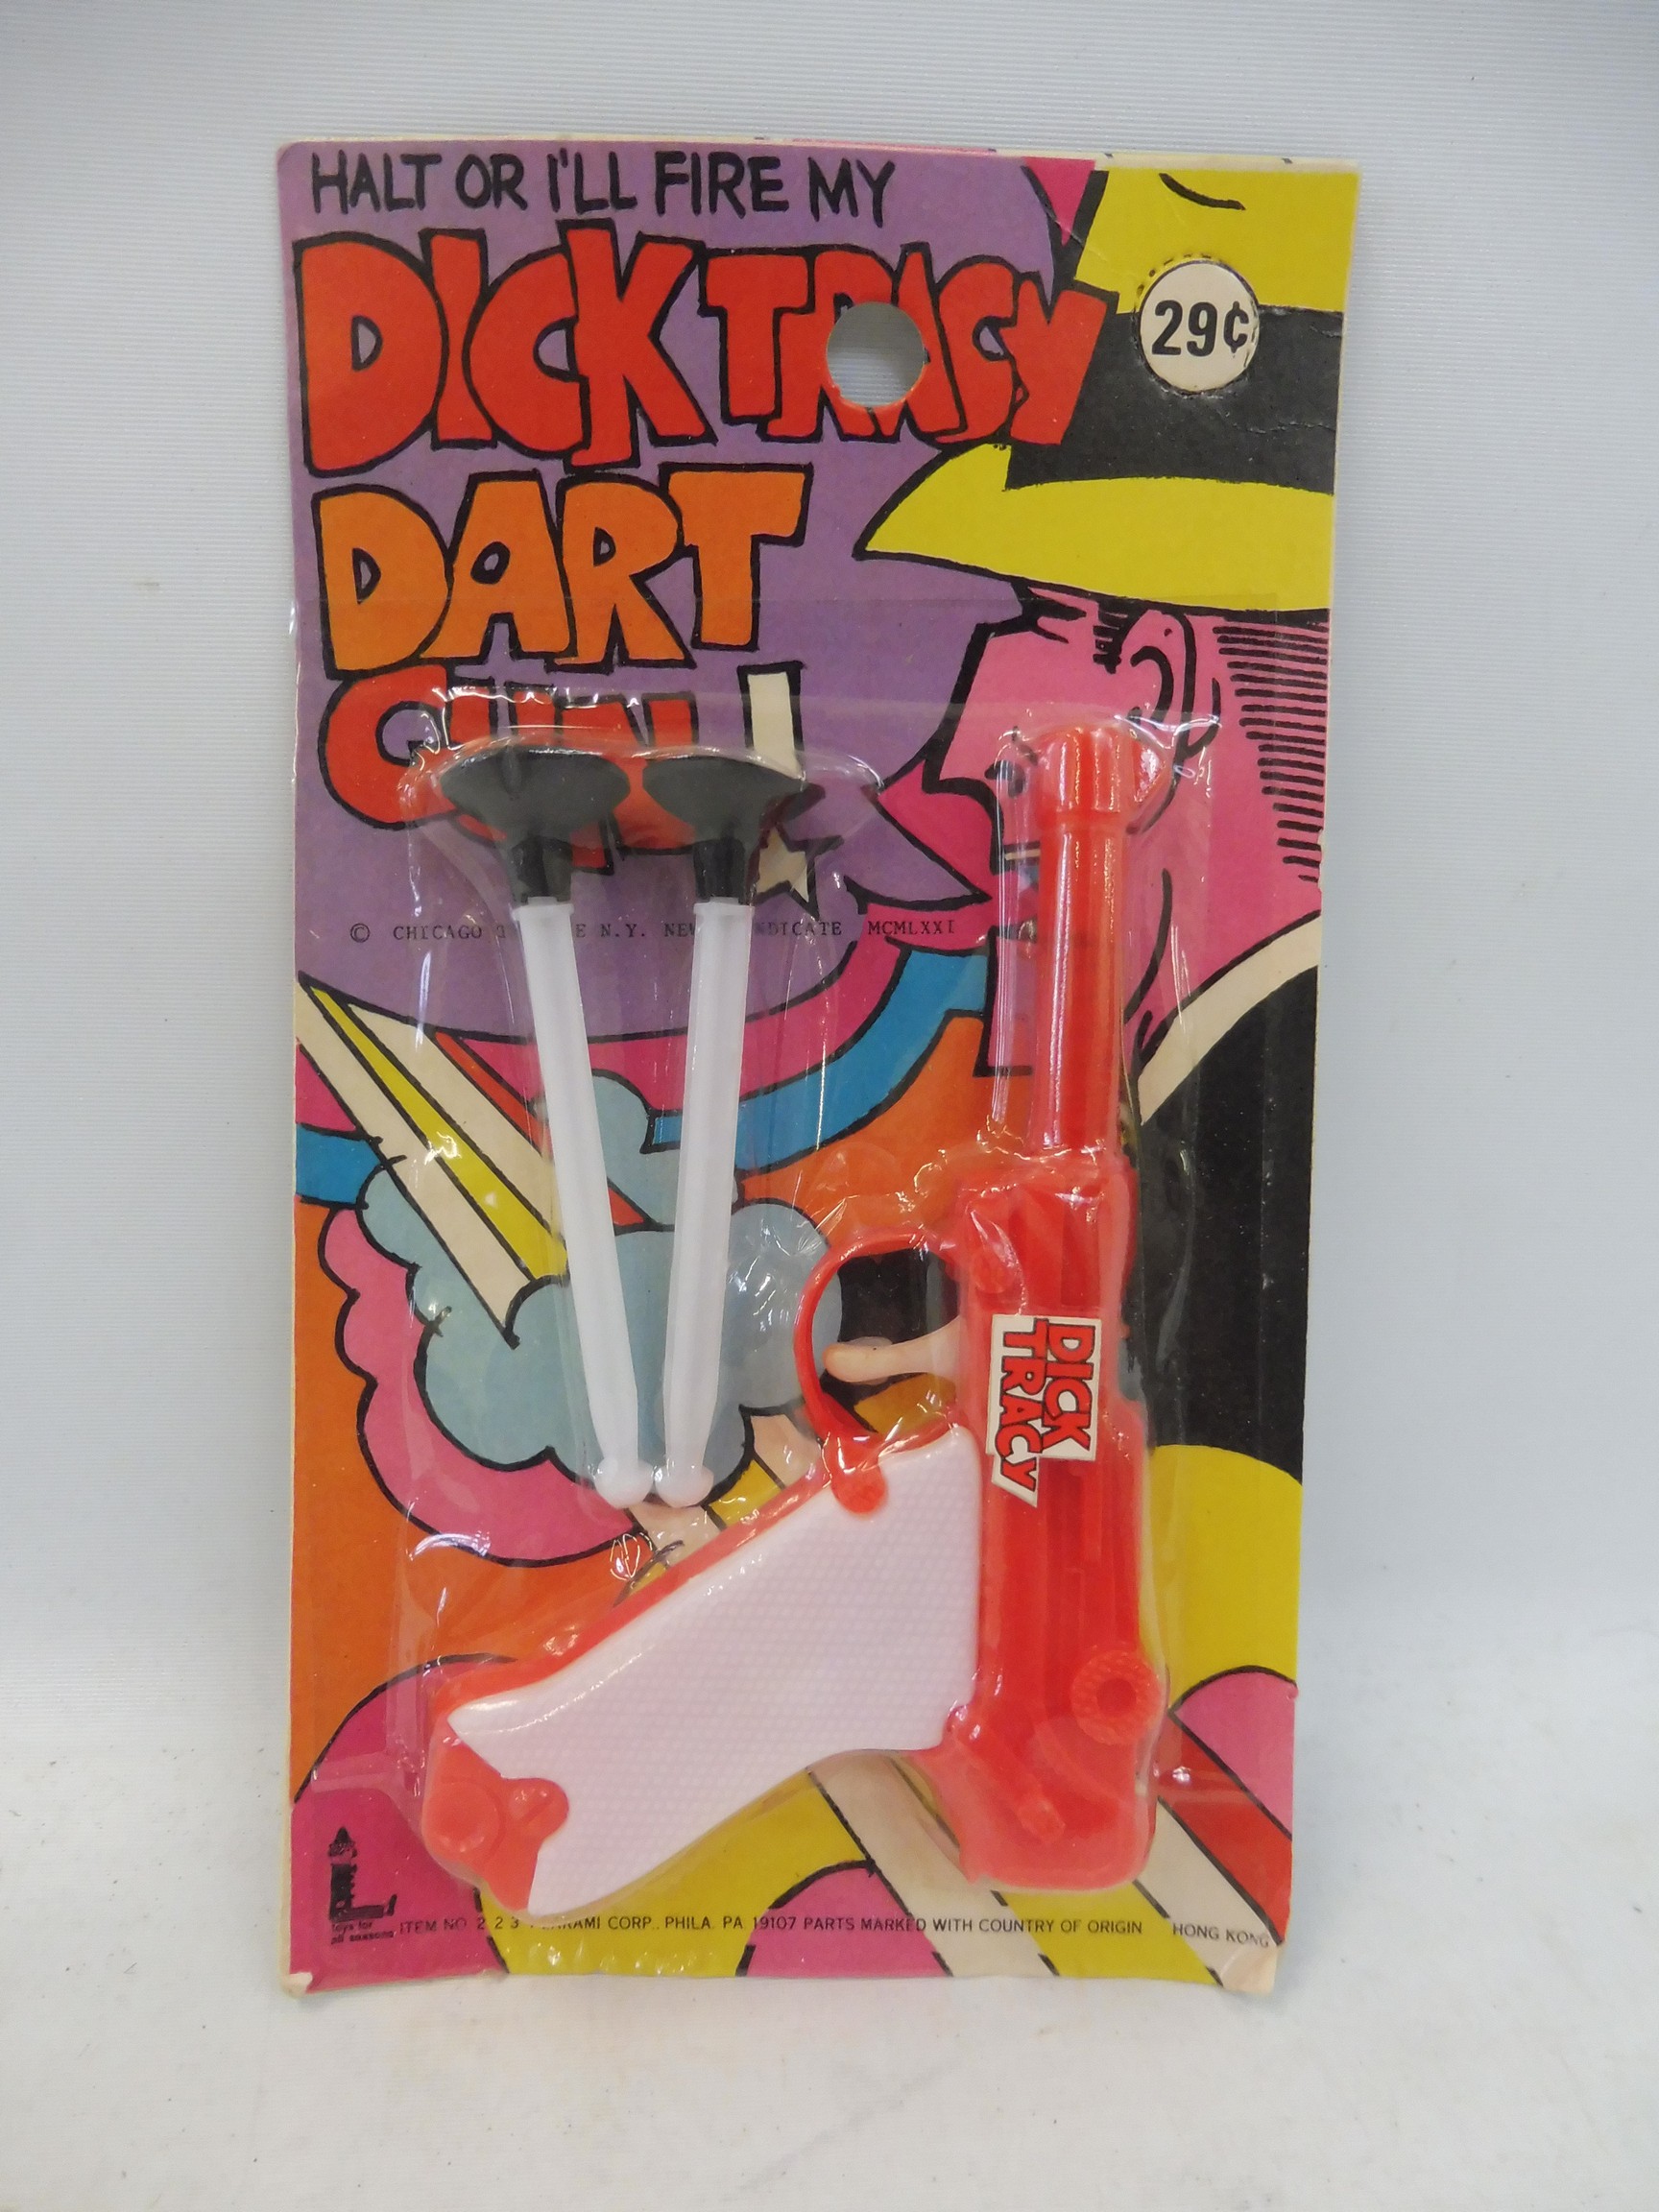 A rare carded Dick Tracey dart gun, 29 cents on packet.